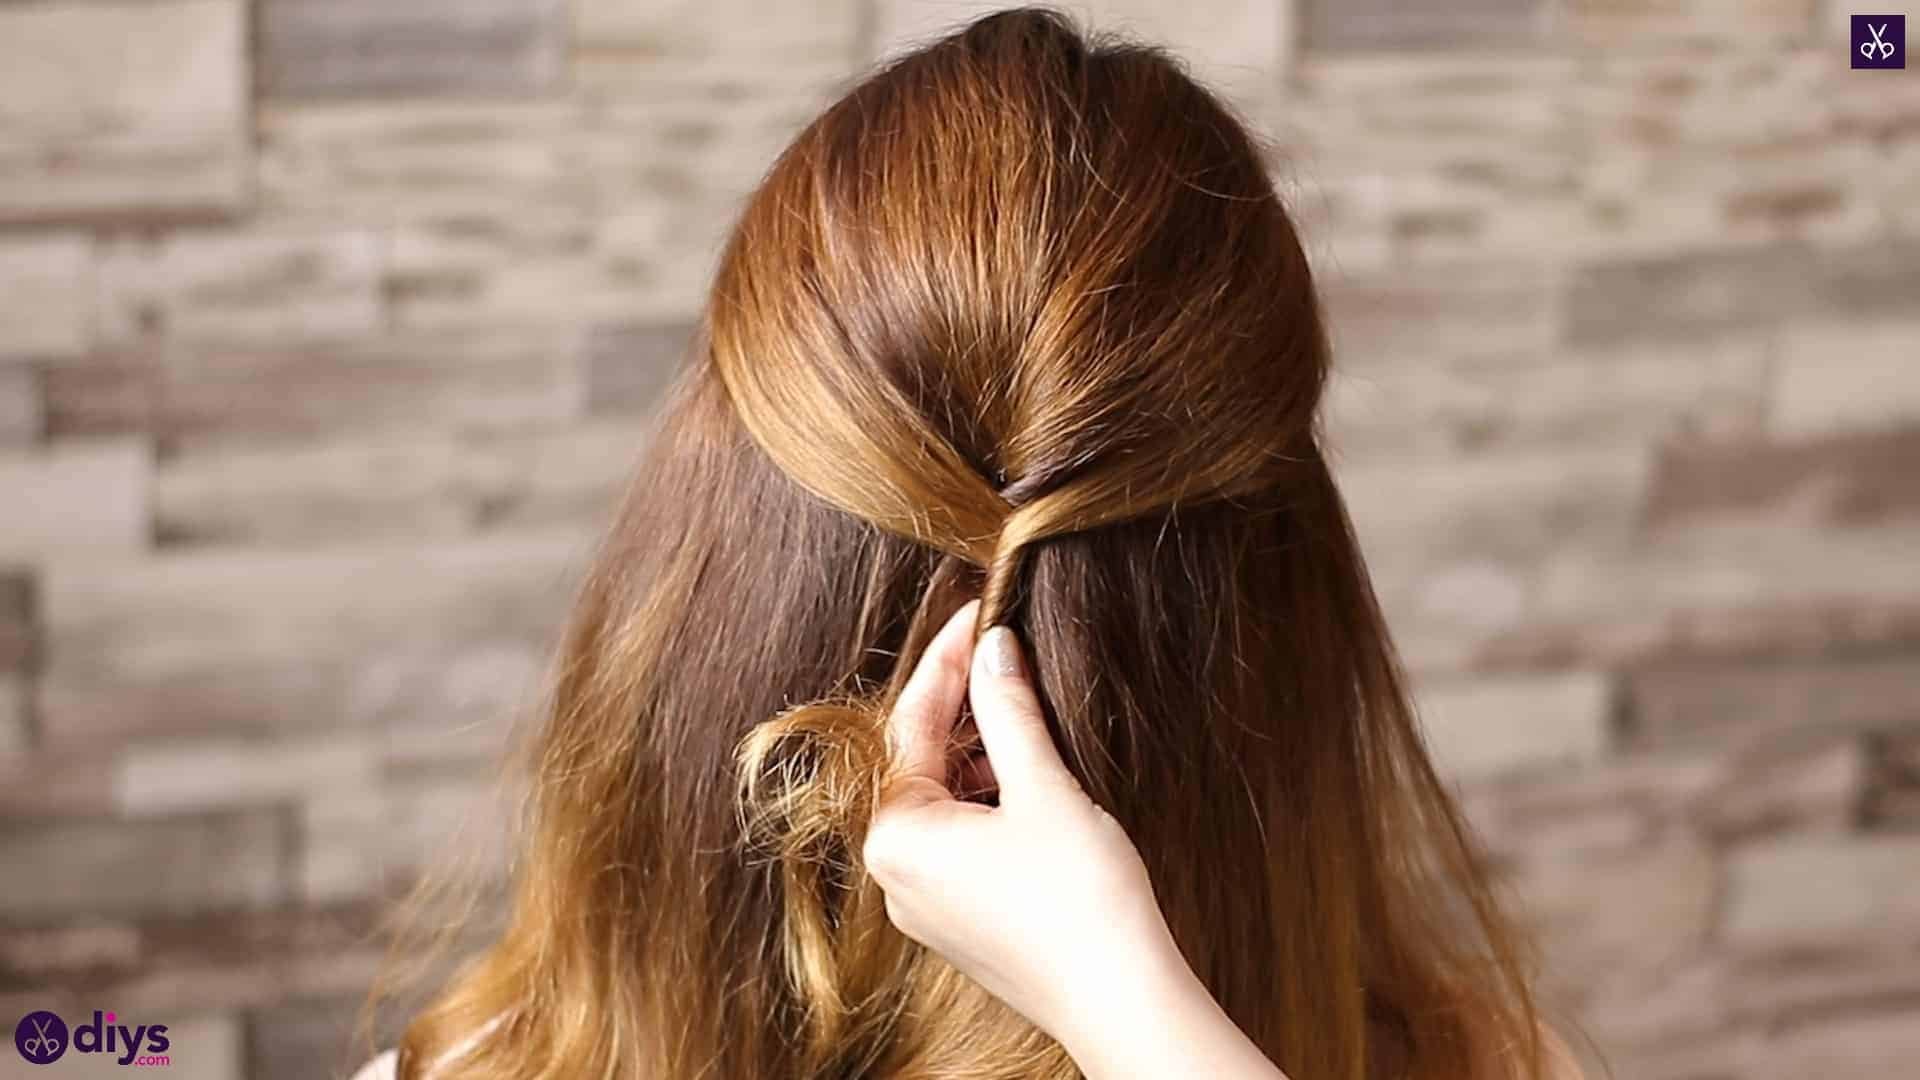 Updo hairstyle for wavy hair 31